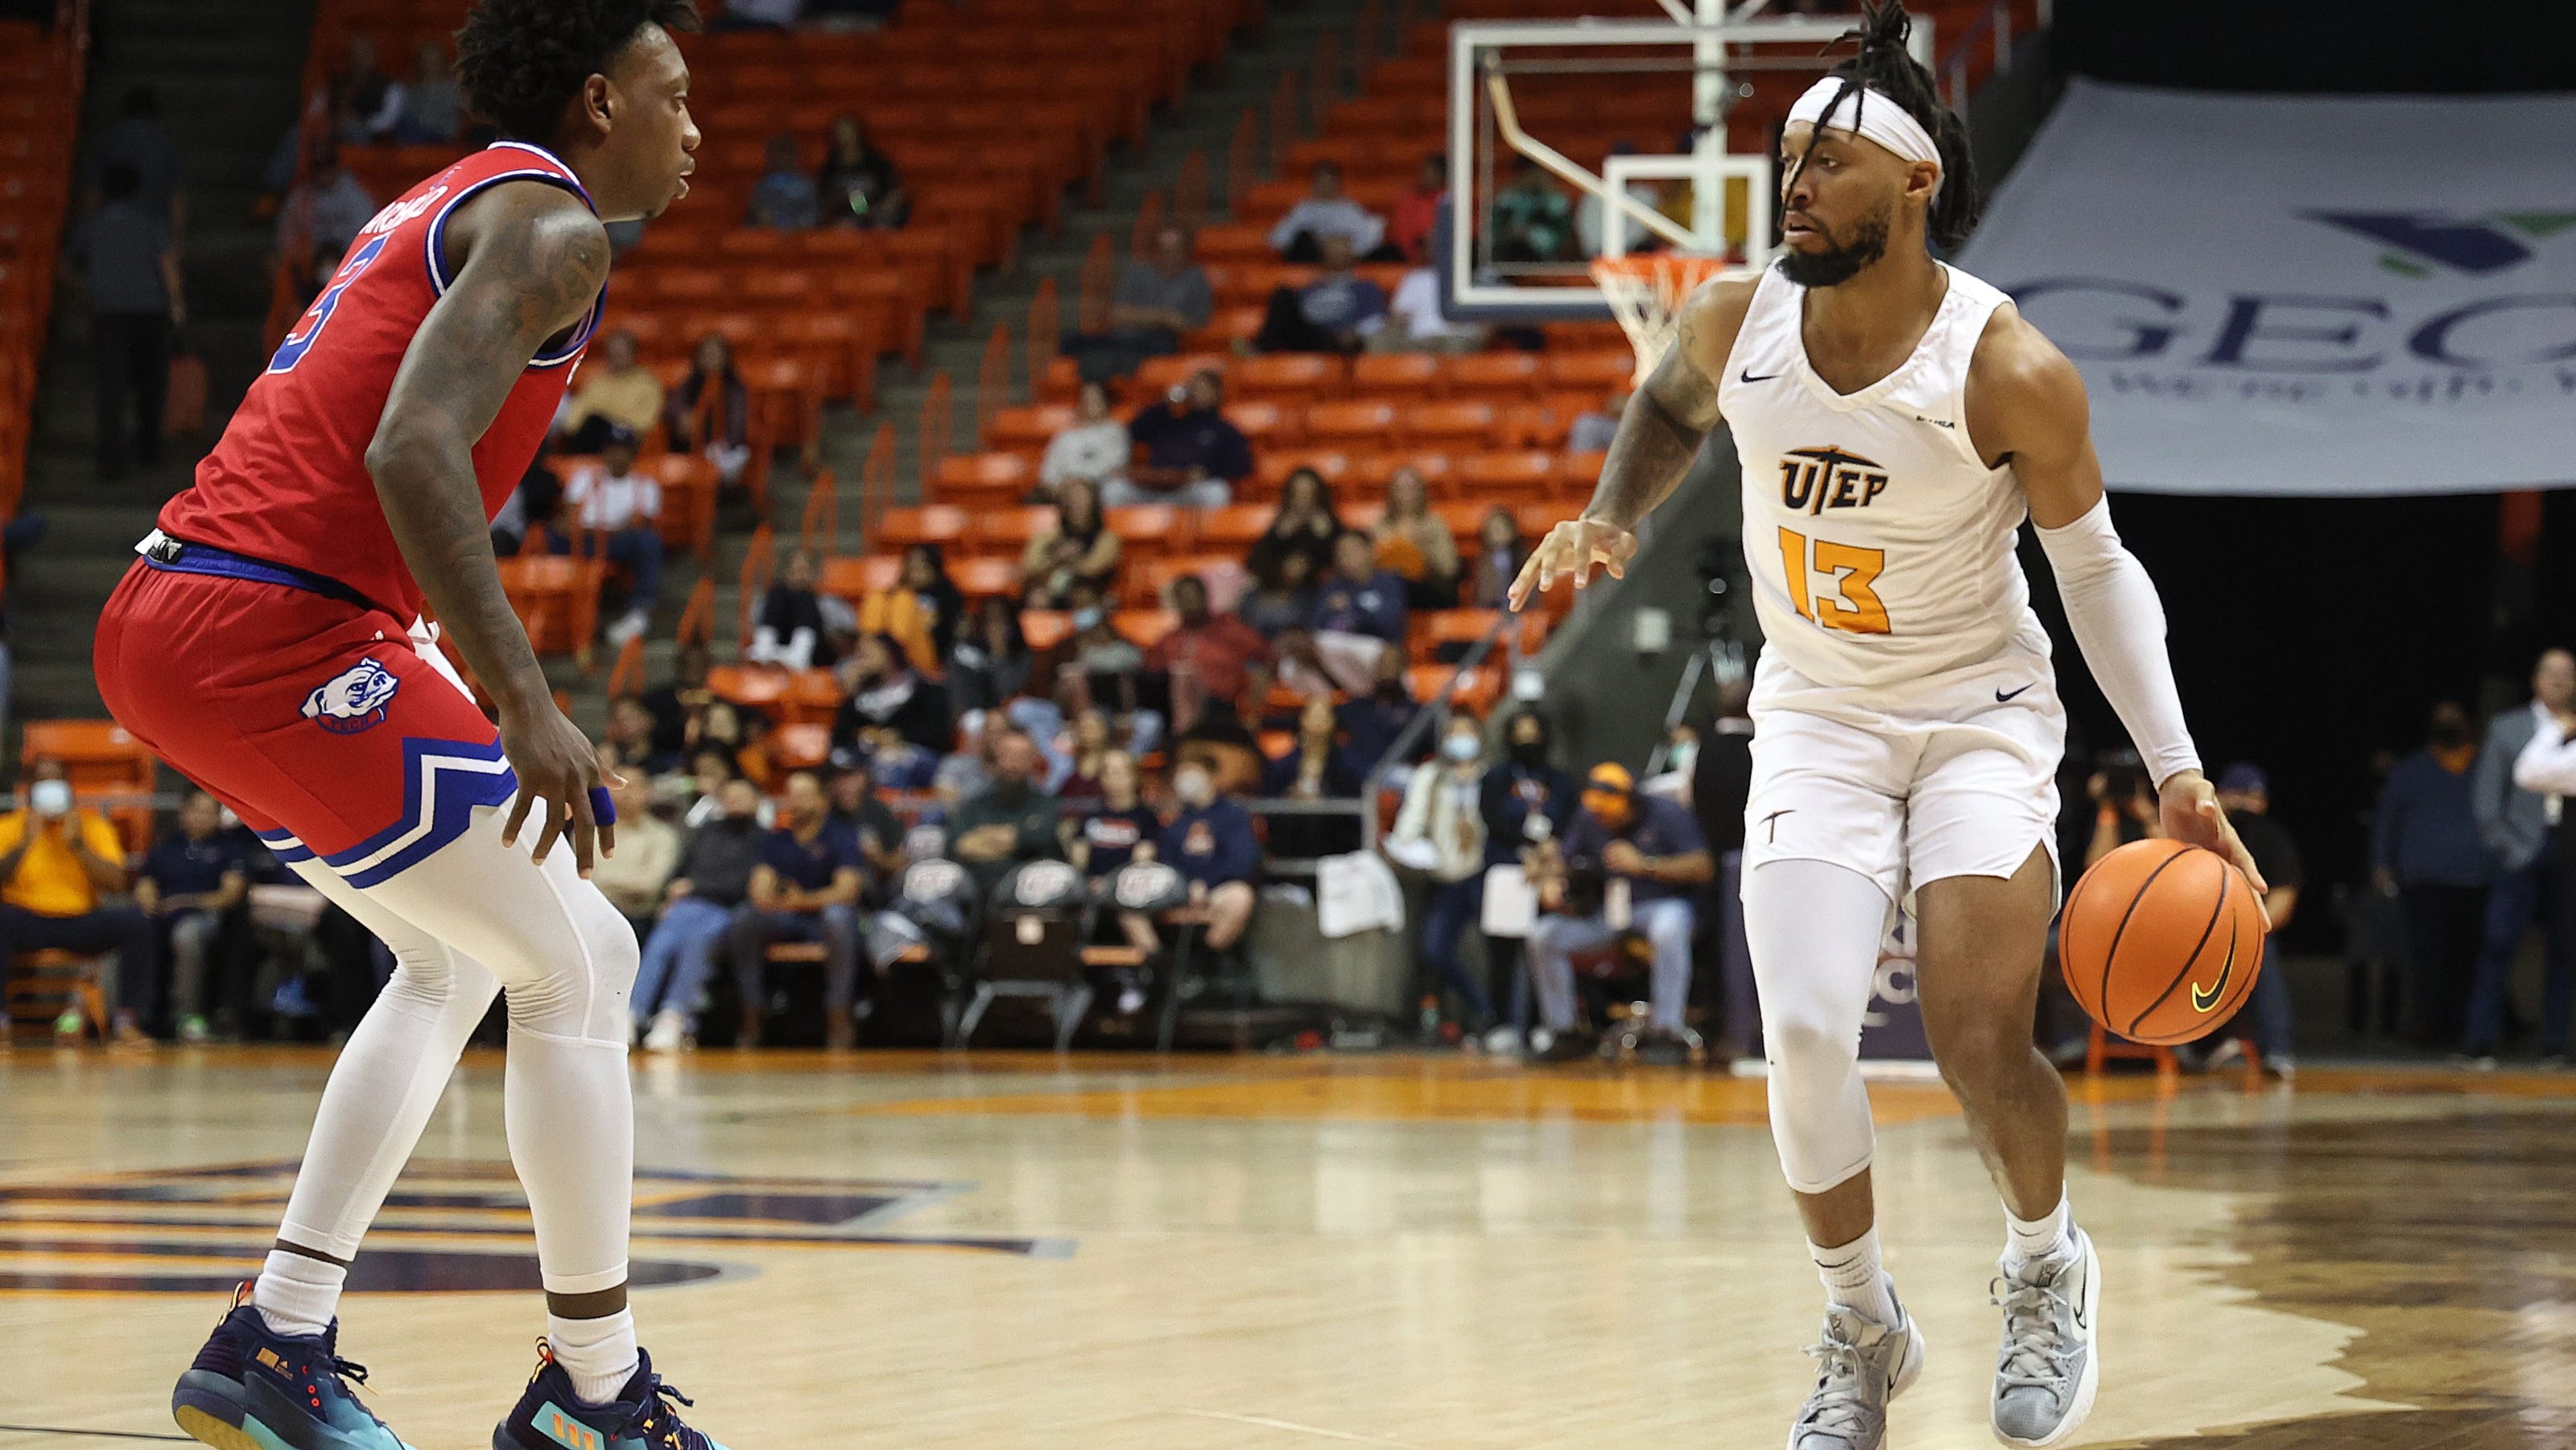 UTEP Miner men vs. Southern Miss Golden Eagles: What to know before the Saturday game